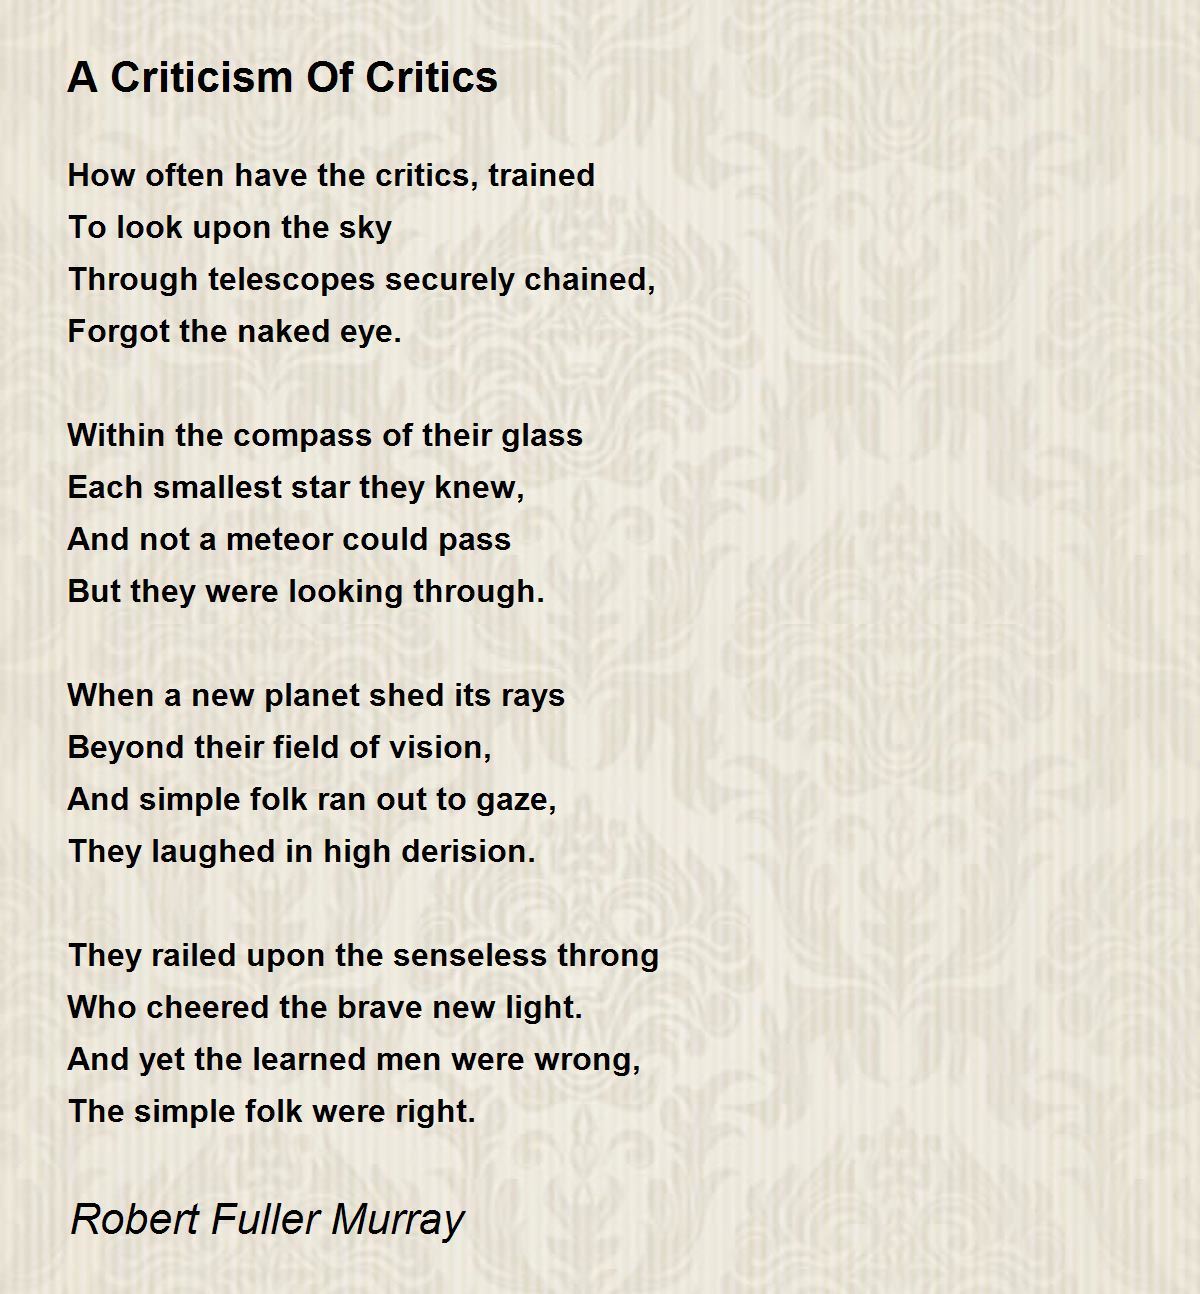 what kind of poem is an essay on criticism